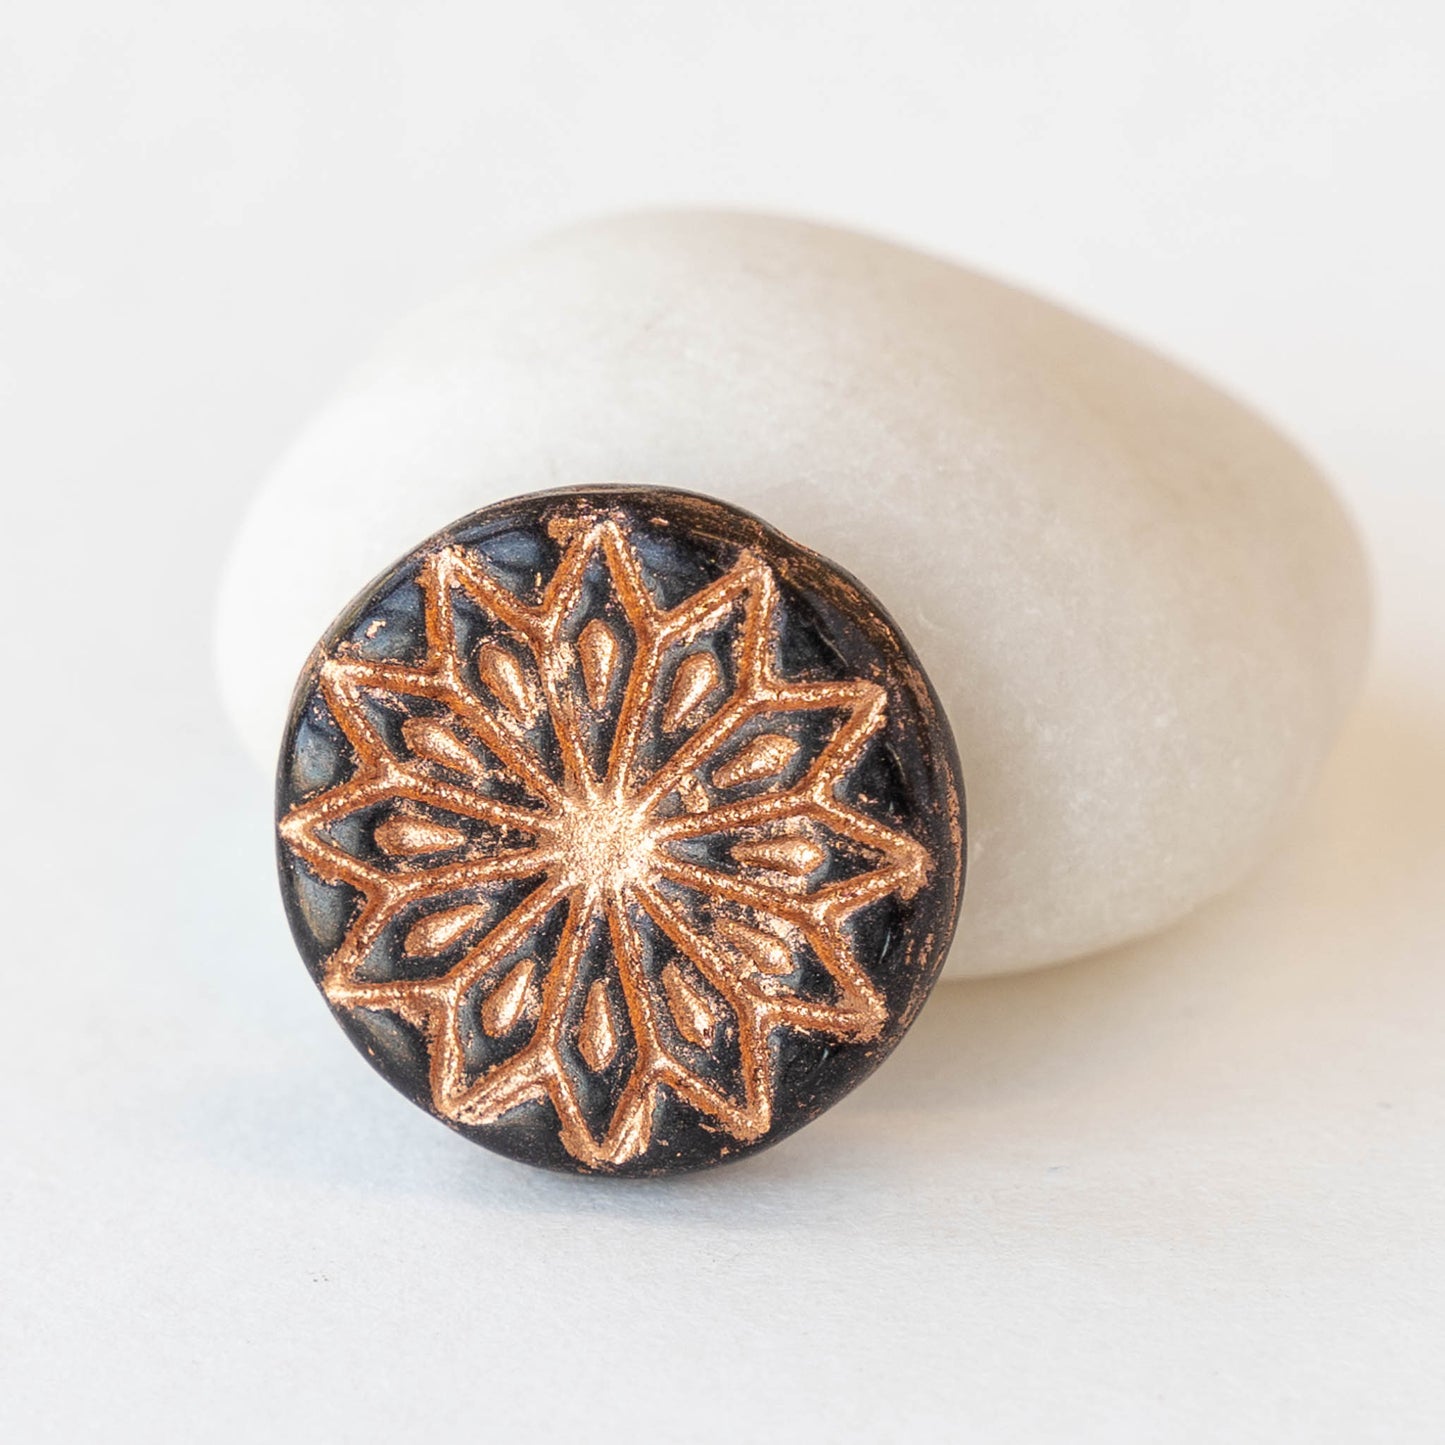 18mm Star Flower Glass Coin Bead -Black with Copper Wash - 4 or 12